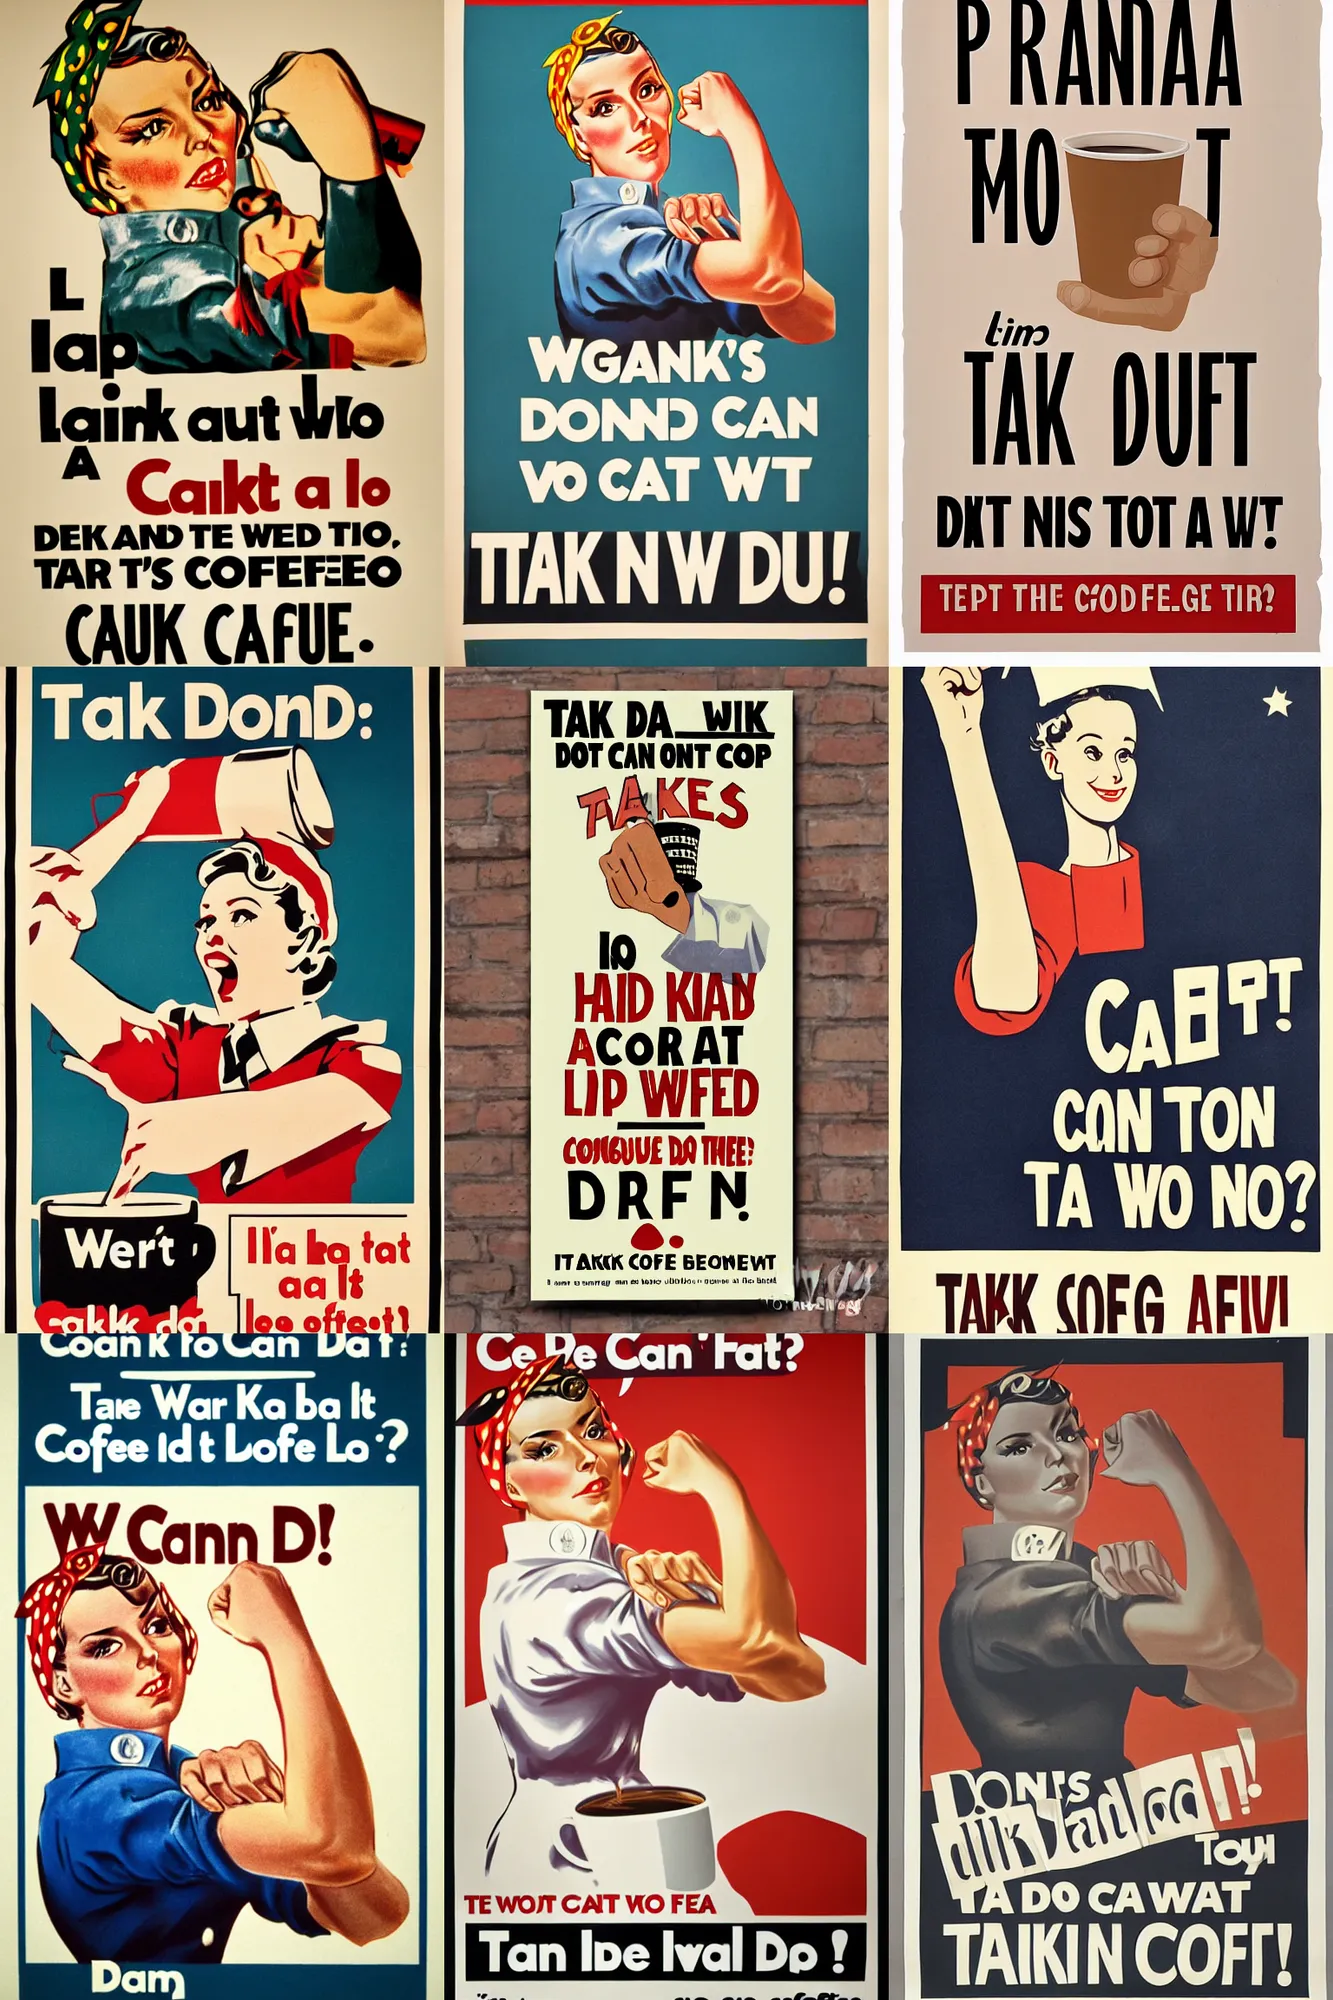 Prompt: propaganda poster, we can do it, drinking take away coffee, tipping coffee